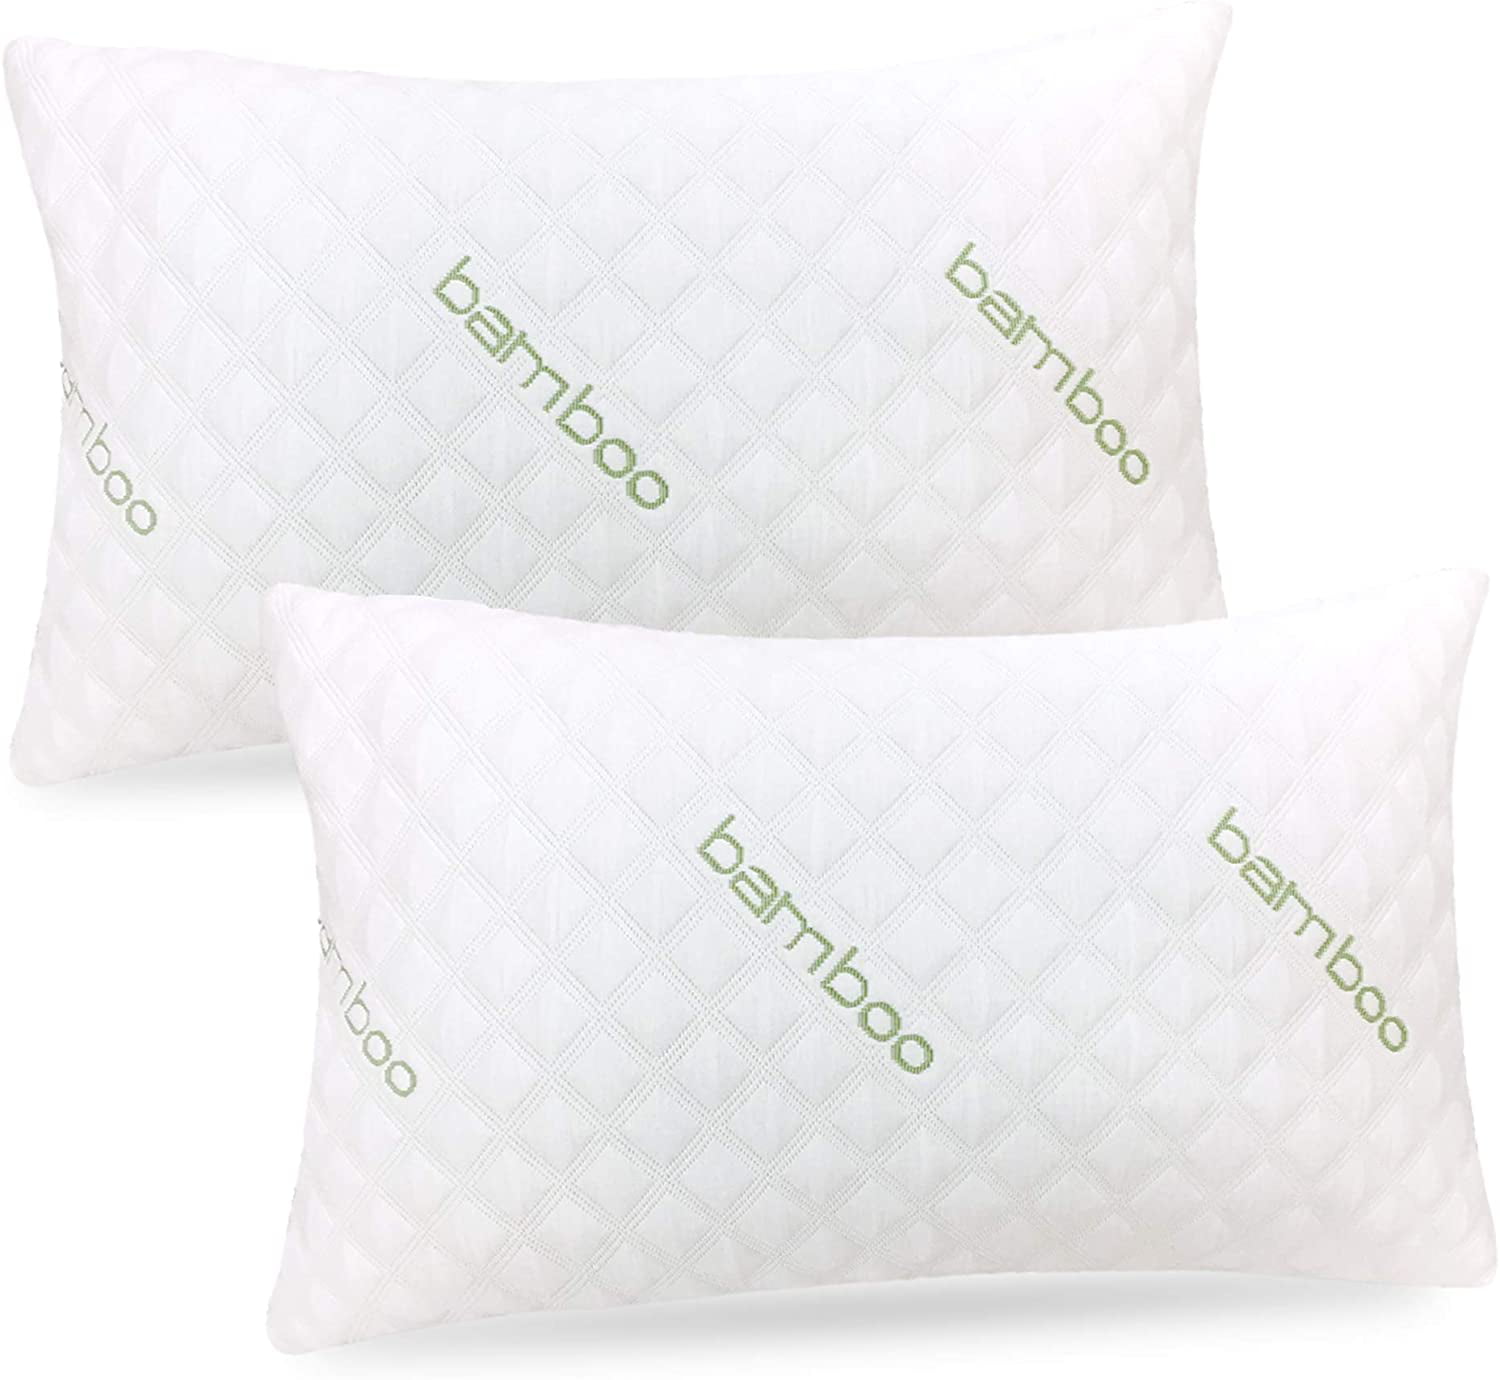 Medium Firmness Luxury Bamboo Memory Foam Pillow w/Removable Cover 